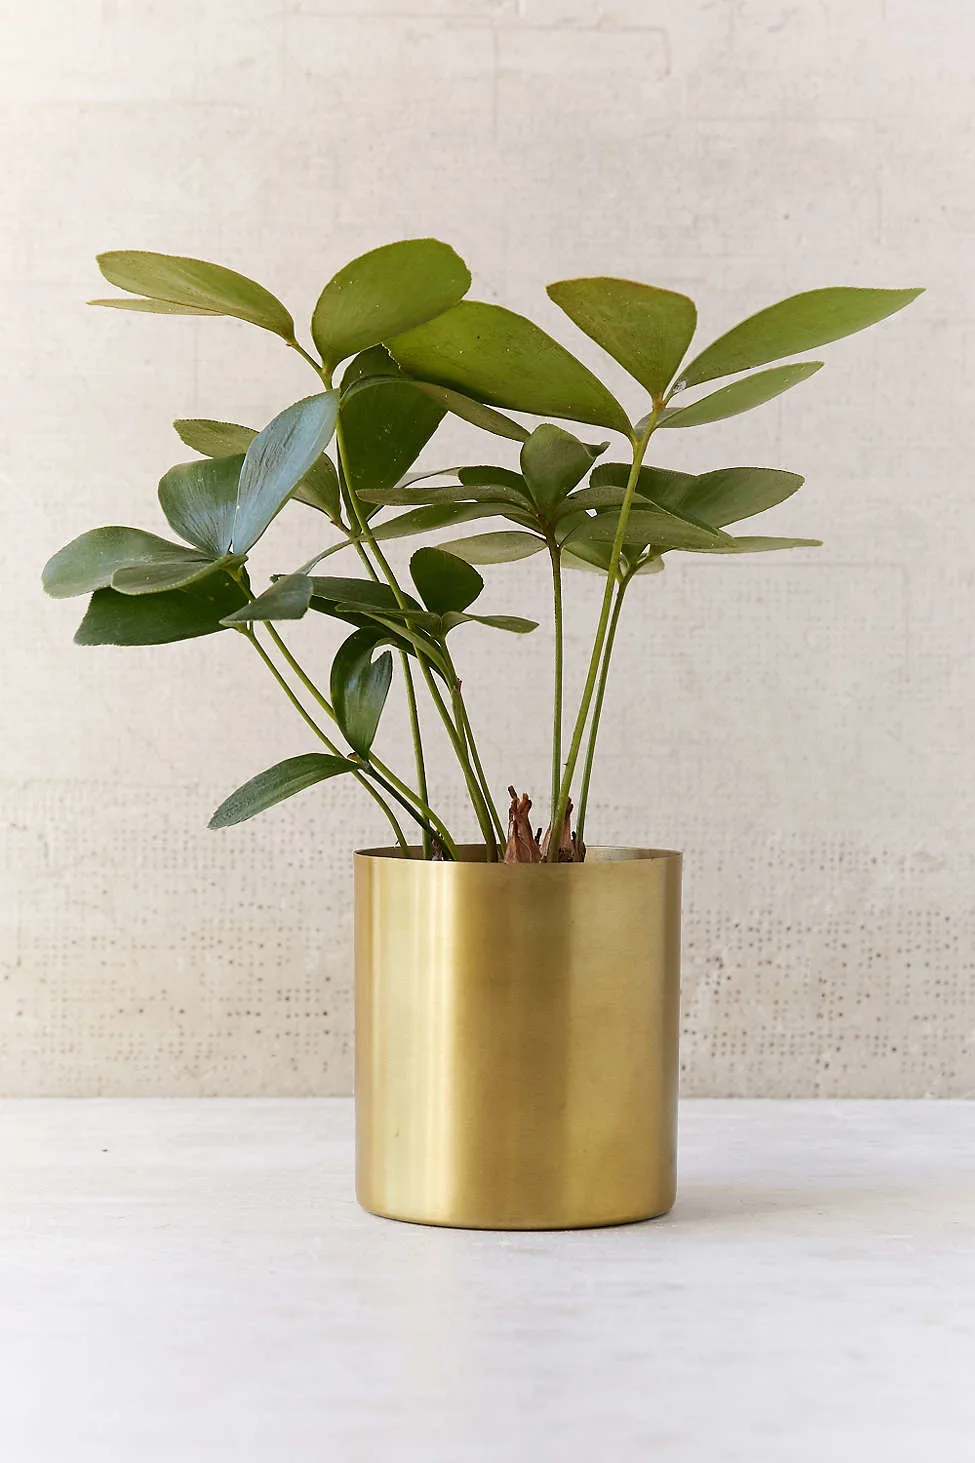 Small Mod Metal Planter from Urban Outfitters